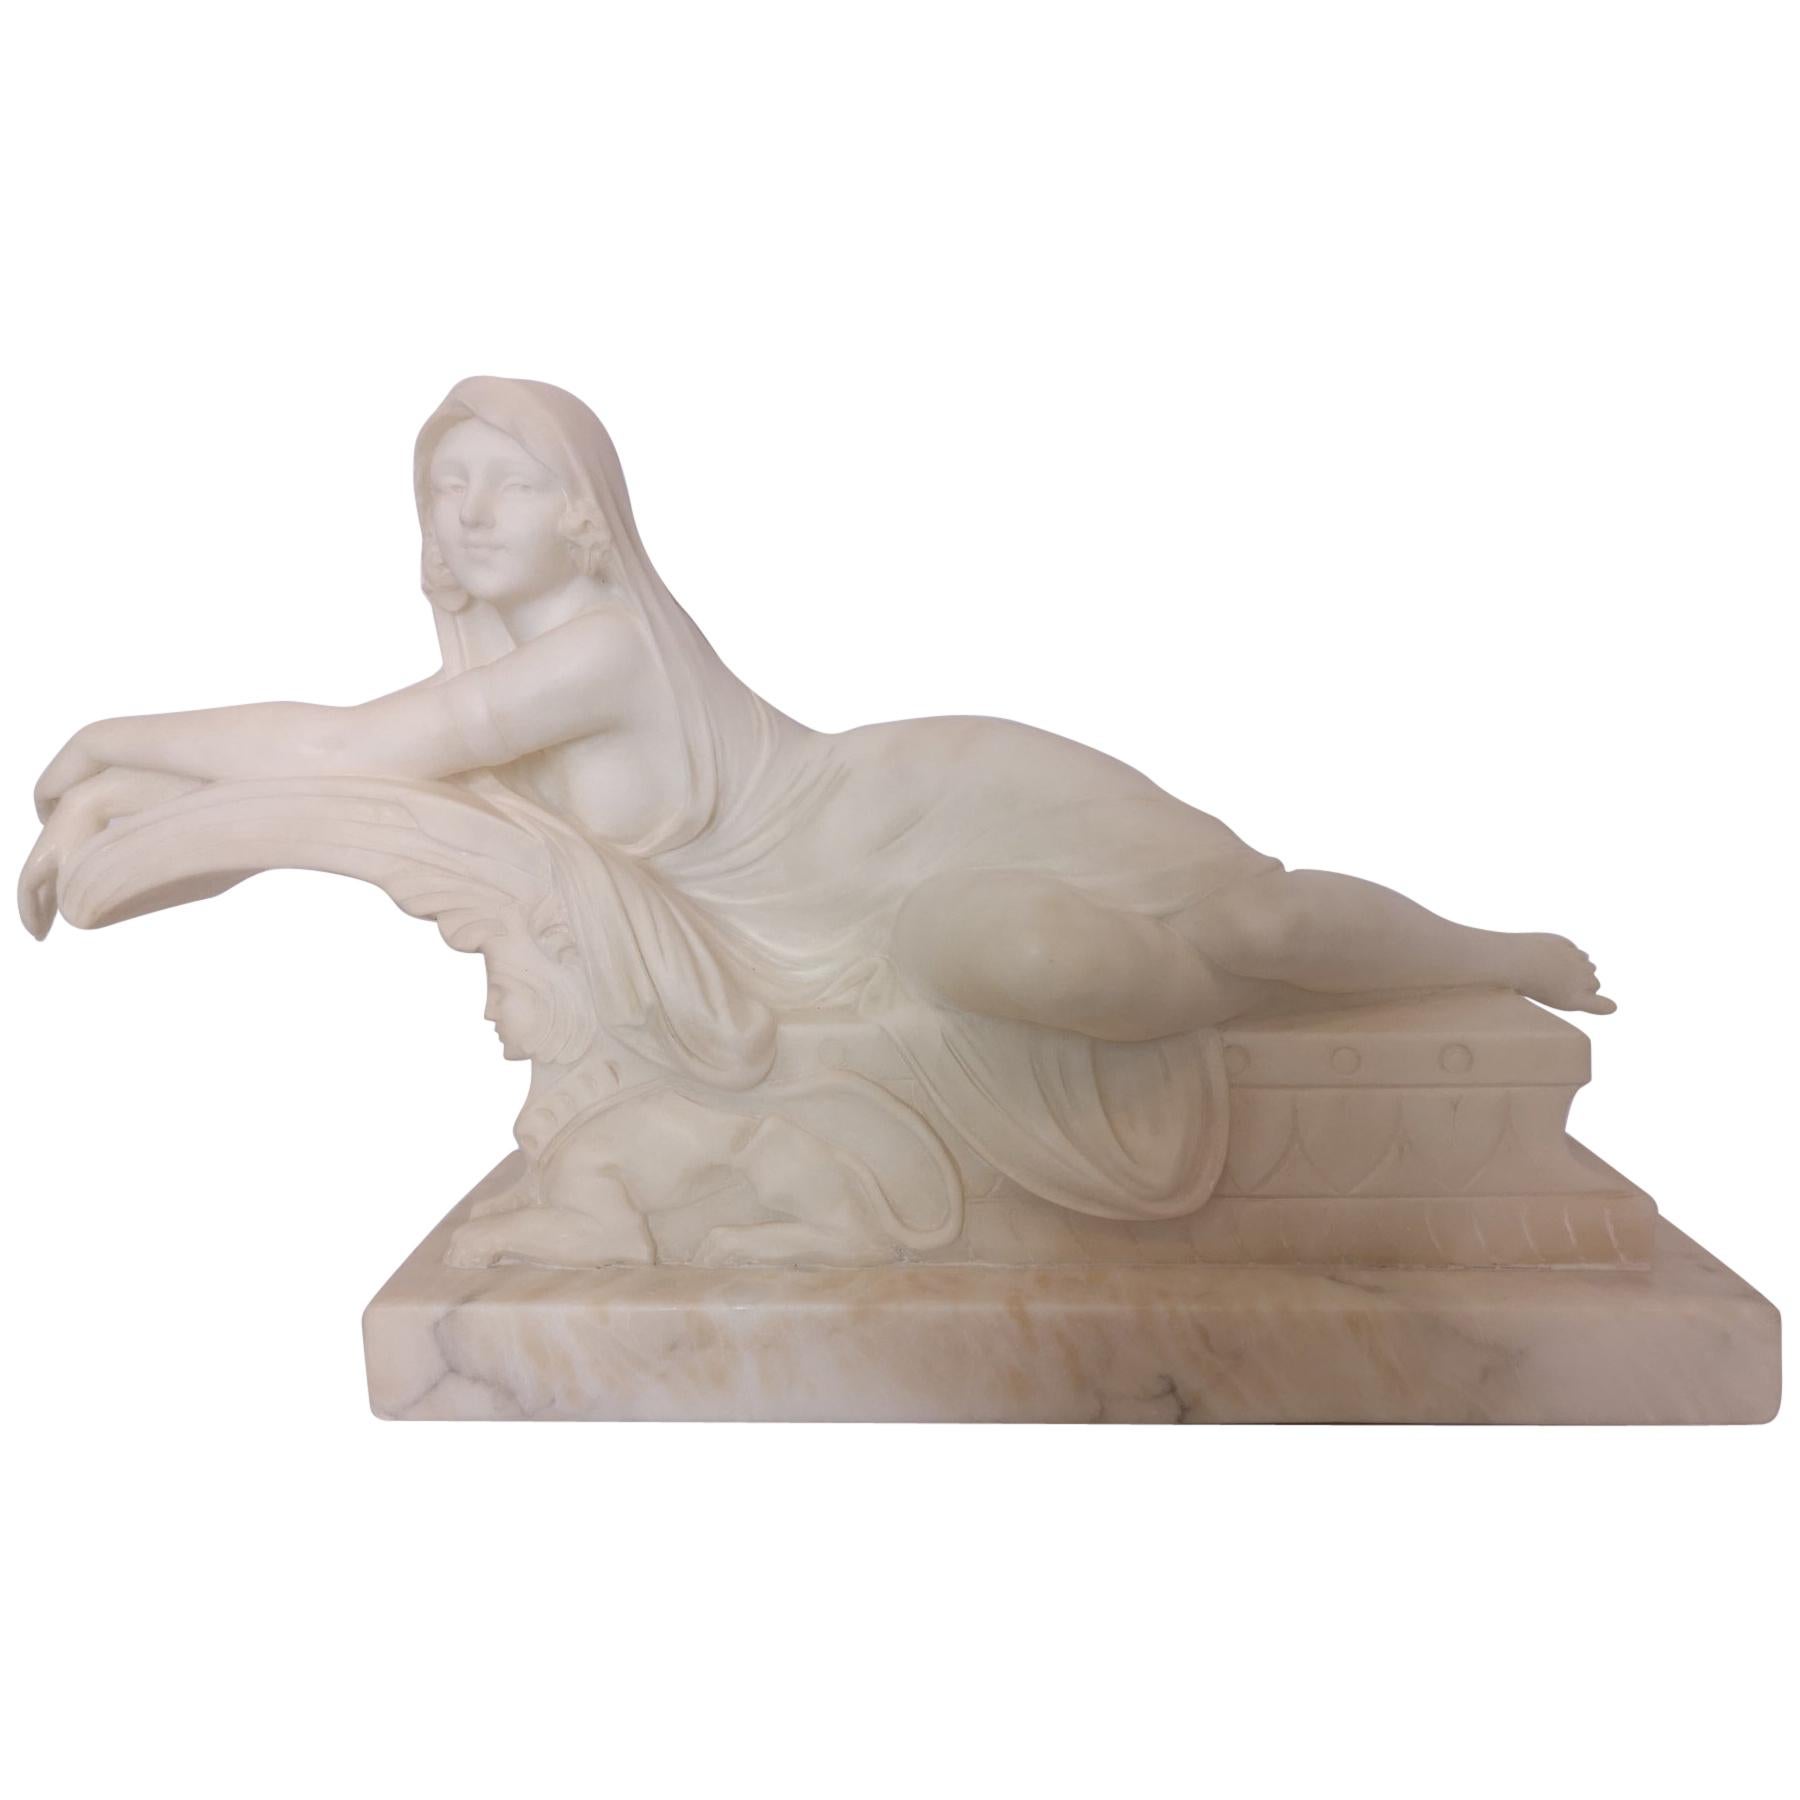 1920s Italian Marble Sculpture of a Lady on a Sphinx by Cipriani For Sale